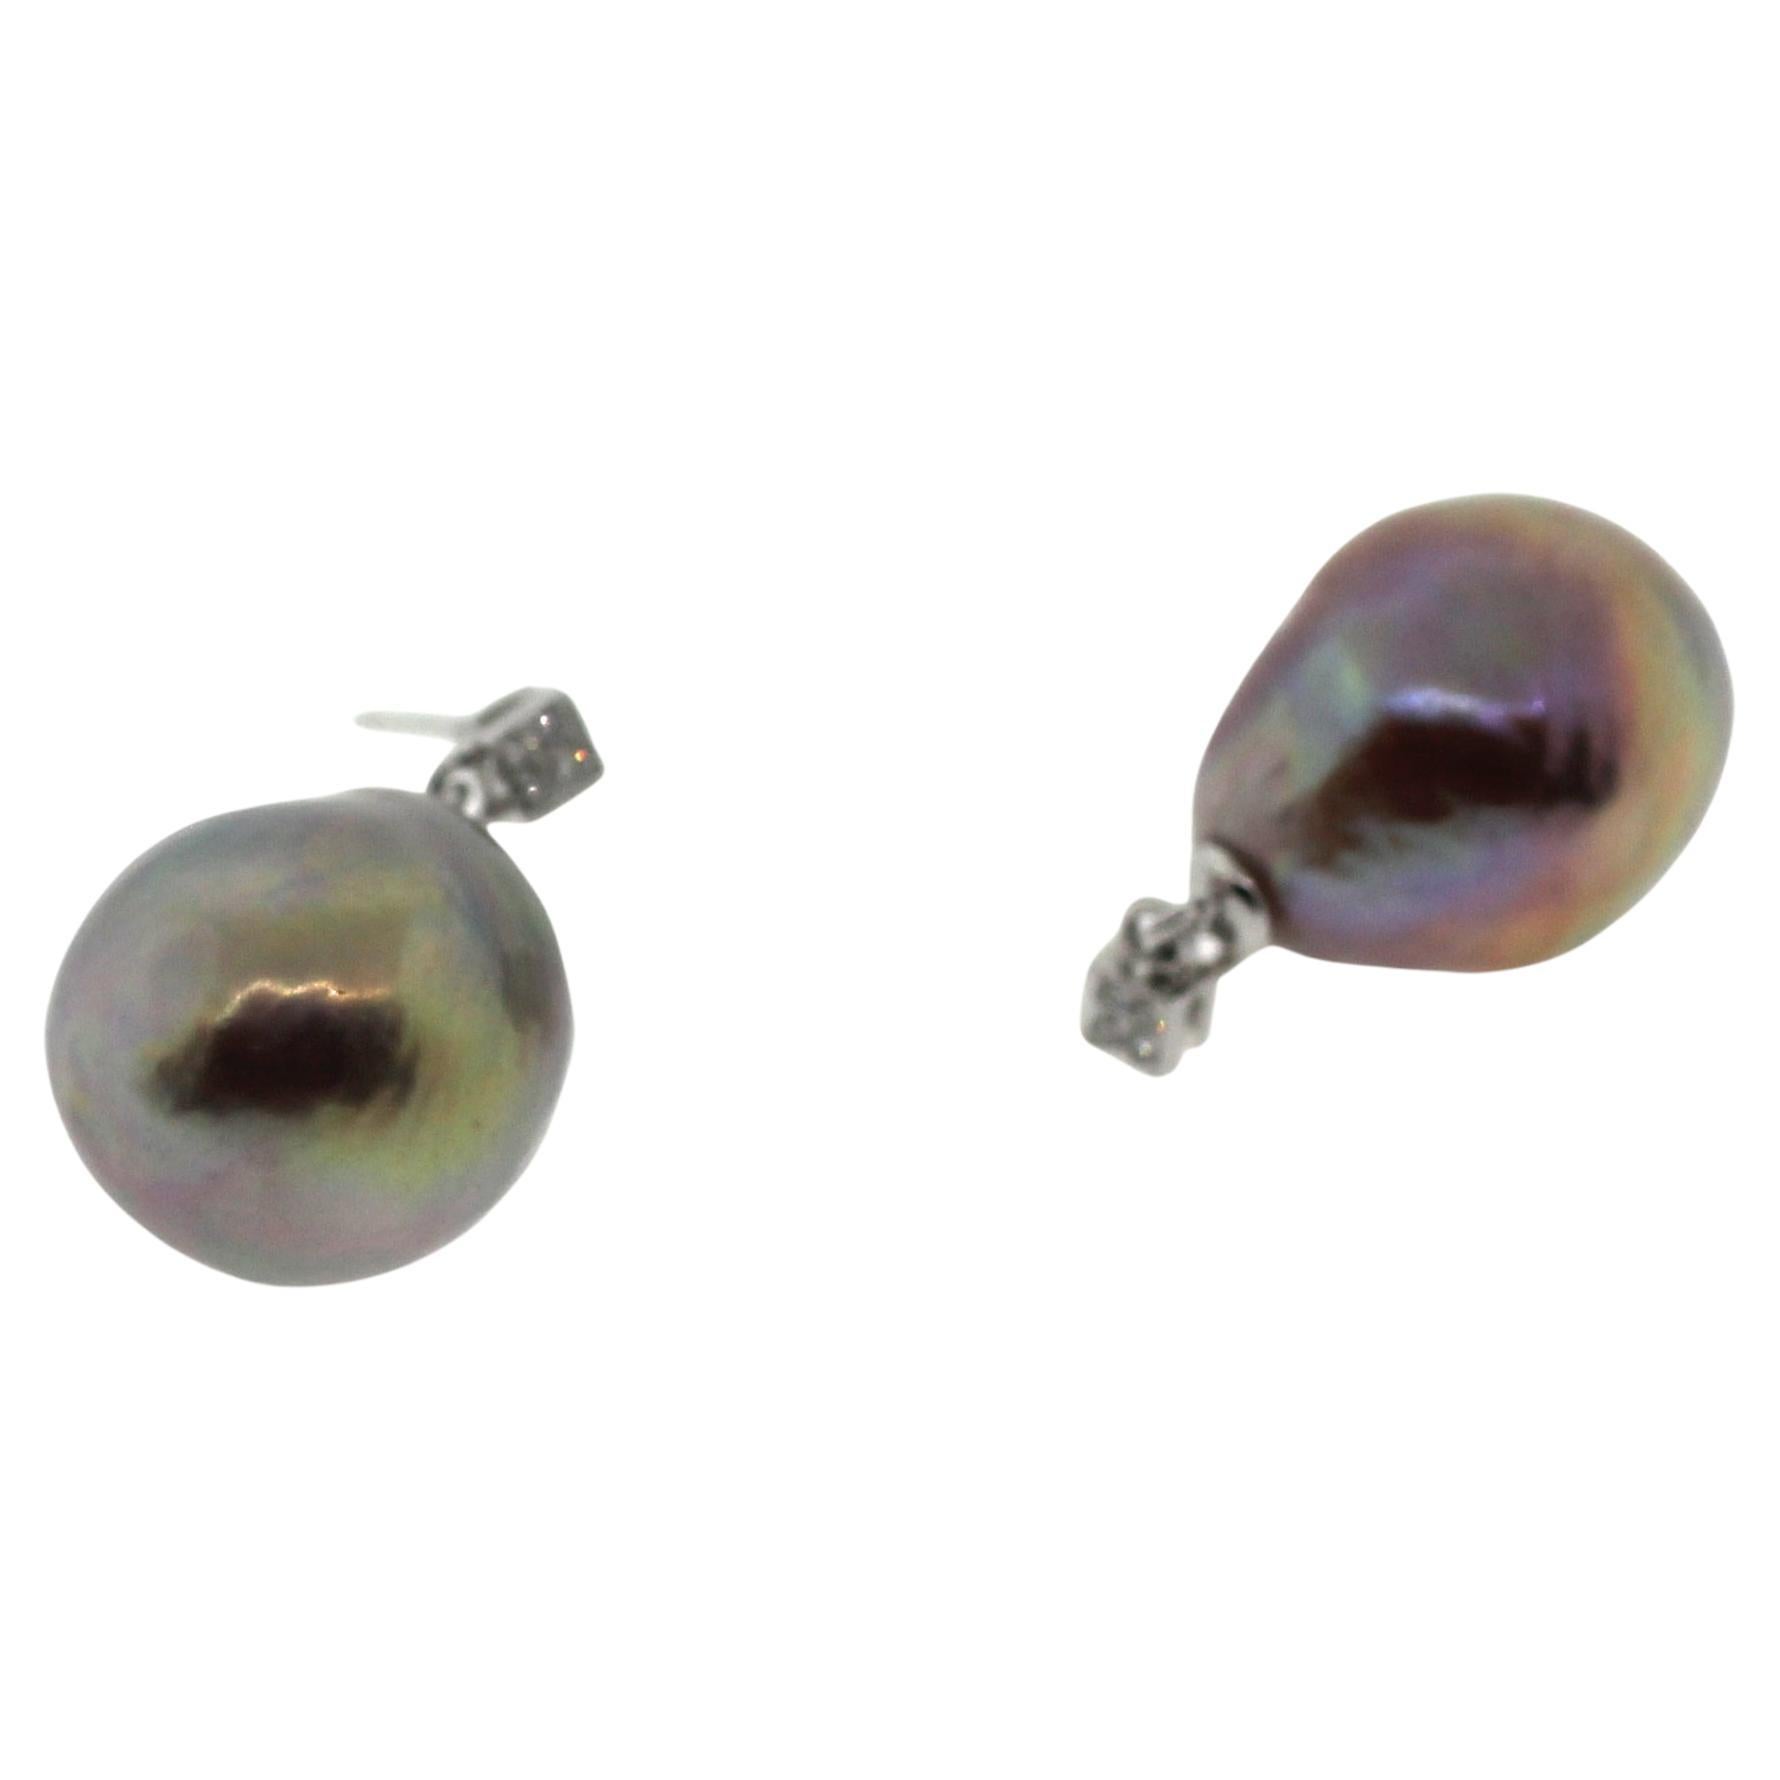 Hakimoto By Jewel Of Ocean
18K Yellow Gold and Diamond 
Fancy Natural Color Metallic Baroque Pearl Earrings.
Hight 0.95 inch
Total item weight 8.6 grams
Featuring 0.038 Carats of Round Brilliant Diamonds
16-13mm Fancy Metallic color Baroque Cultured